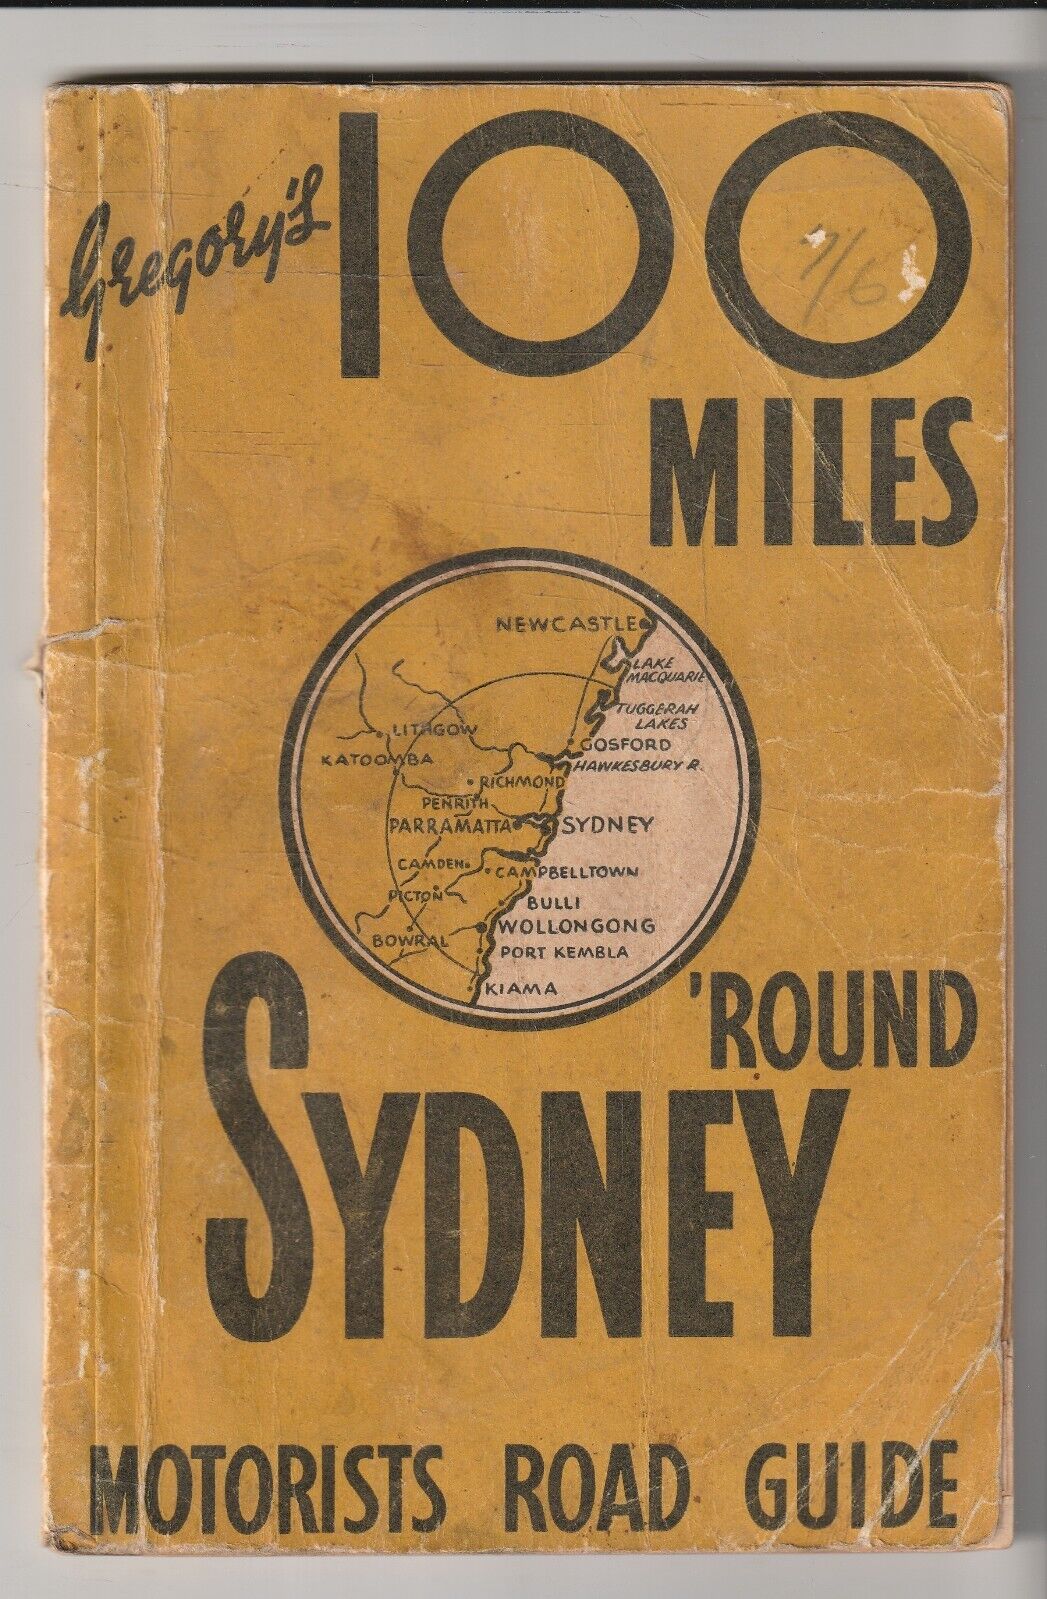 TRAVEL , GREGORY'S 100 MILEA AROUND SYDNEY , 23th EDITION , MOTORISTS ROAD GUIDE